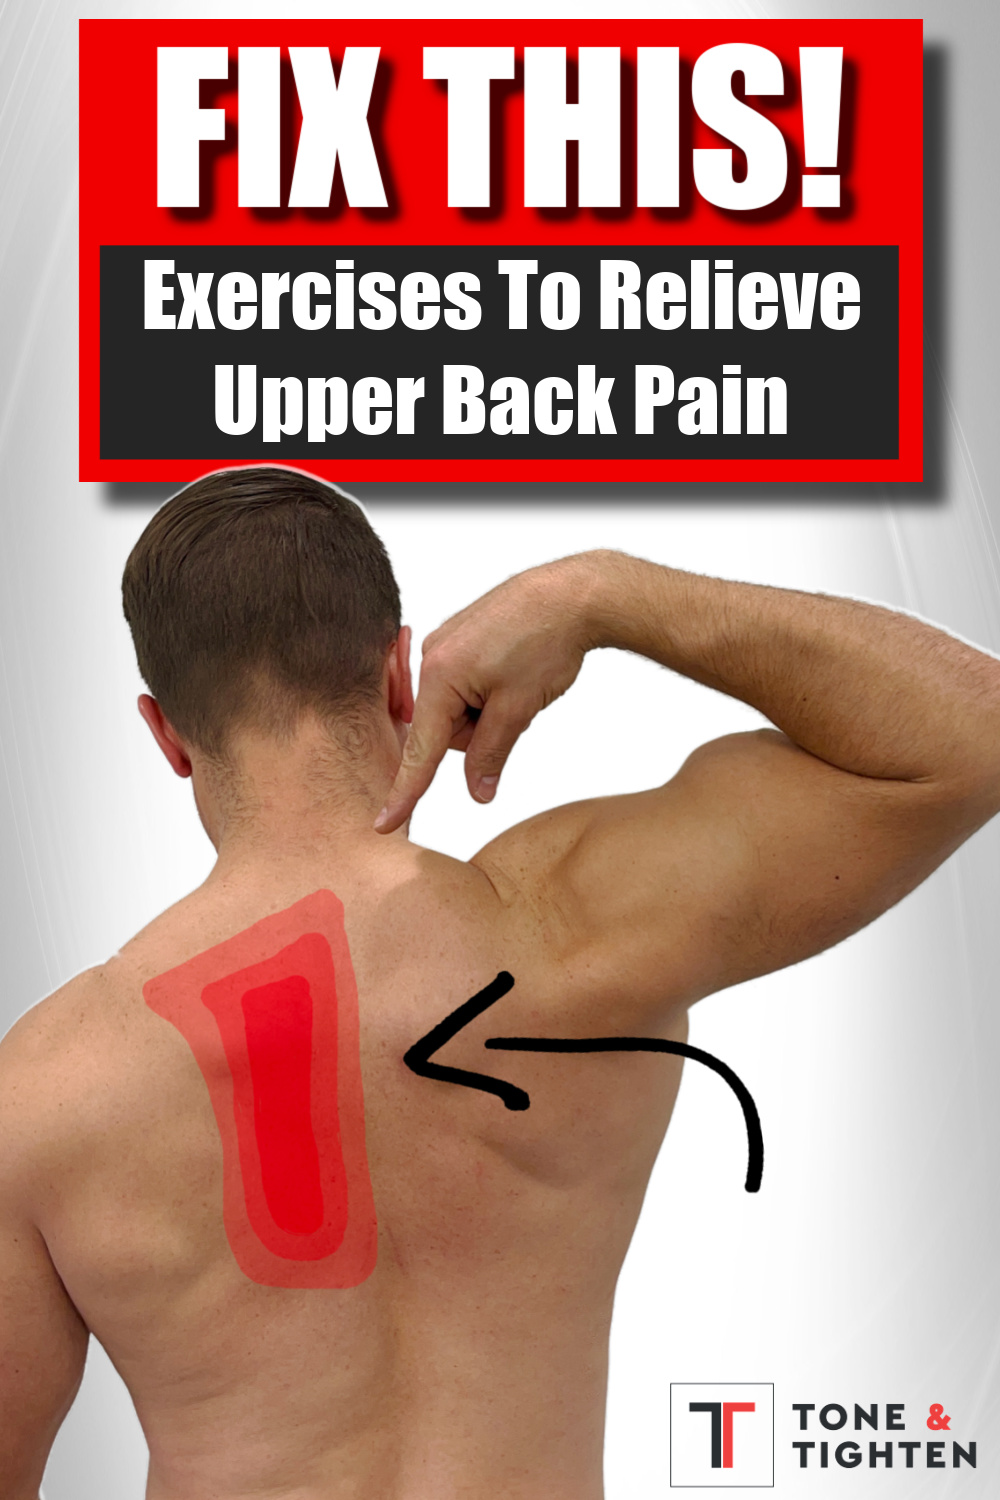 The best exercises to relieve upper back pain